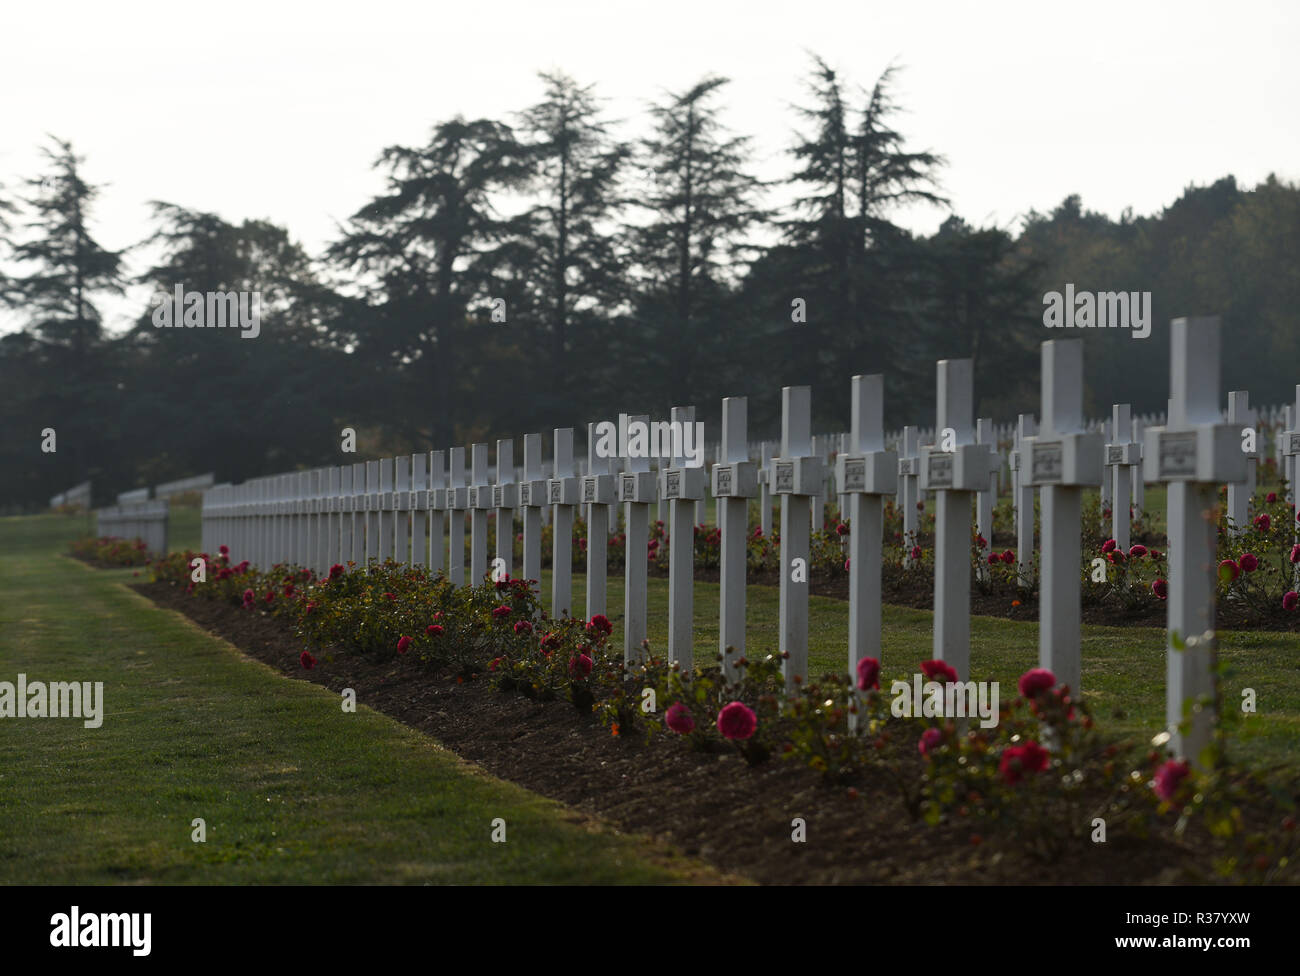 October 20, 2018 - Douaumont, France: The war cemetery monument of Douaumont, which hosts the remains of 130 000 soldiers, both French and German, who took part in the First World War. There are 15 000 crosses outside the monument with the names of French soldiers who died in the vicinity. La necropole et l'ossuaire de Douaumont, un monument imposant a la memoire des soldats ayant participe a la bataille de Verdun durant la Premiere Guerre mondiale. *** FRANCE OUT / NO SALES TO FRENCH MEDIA *** Stock Photo